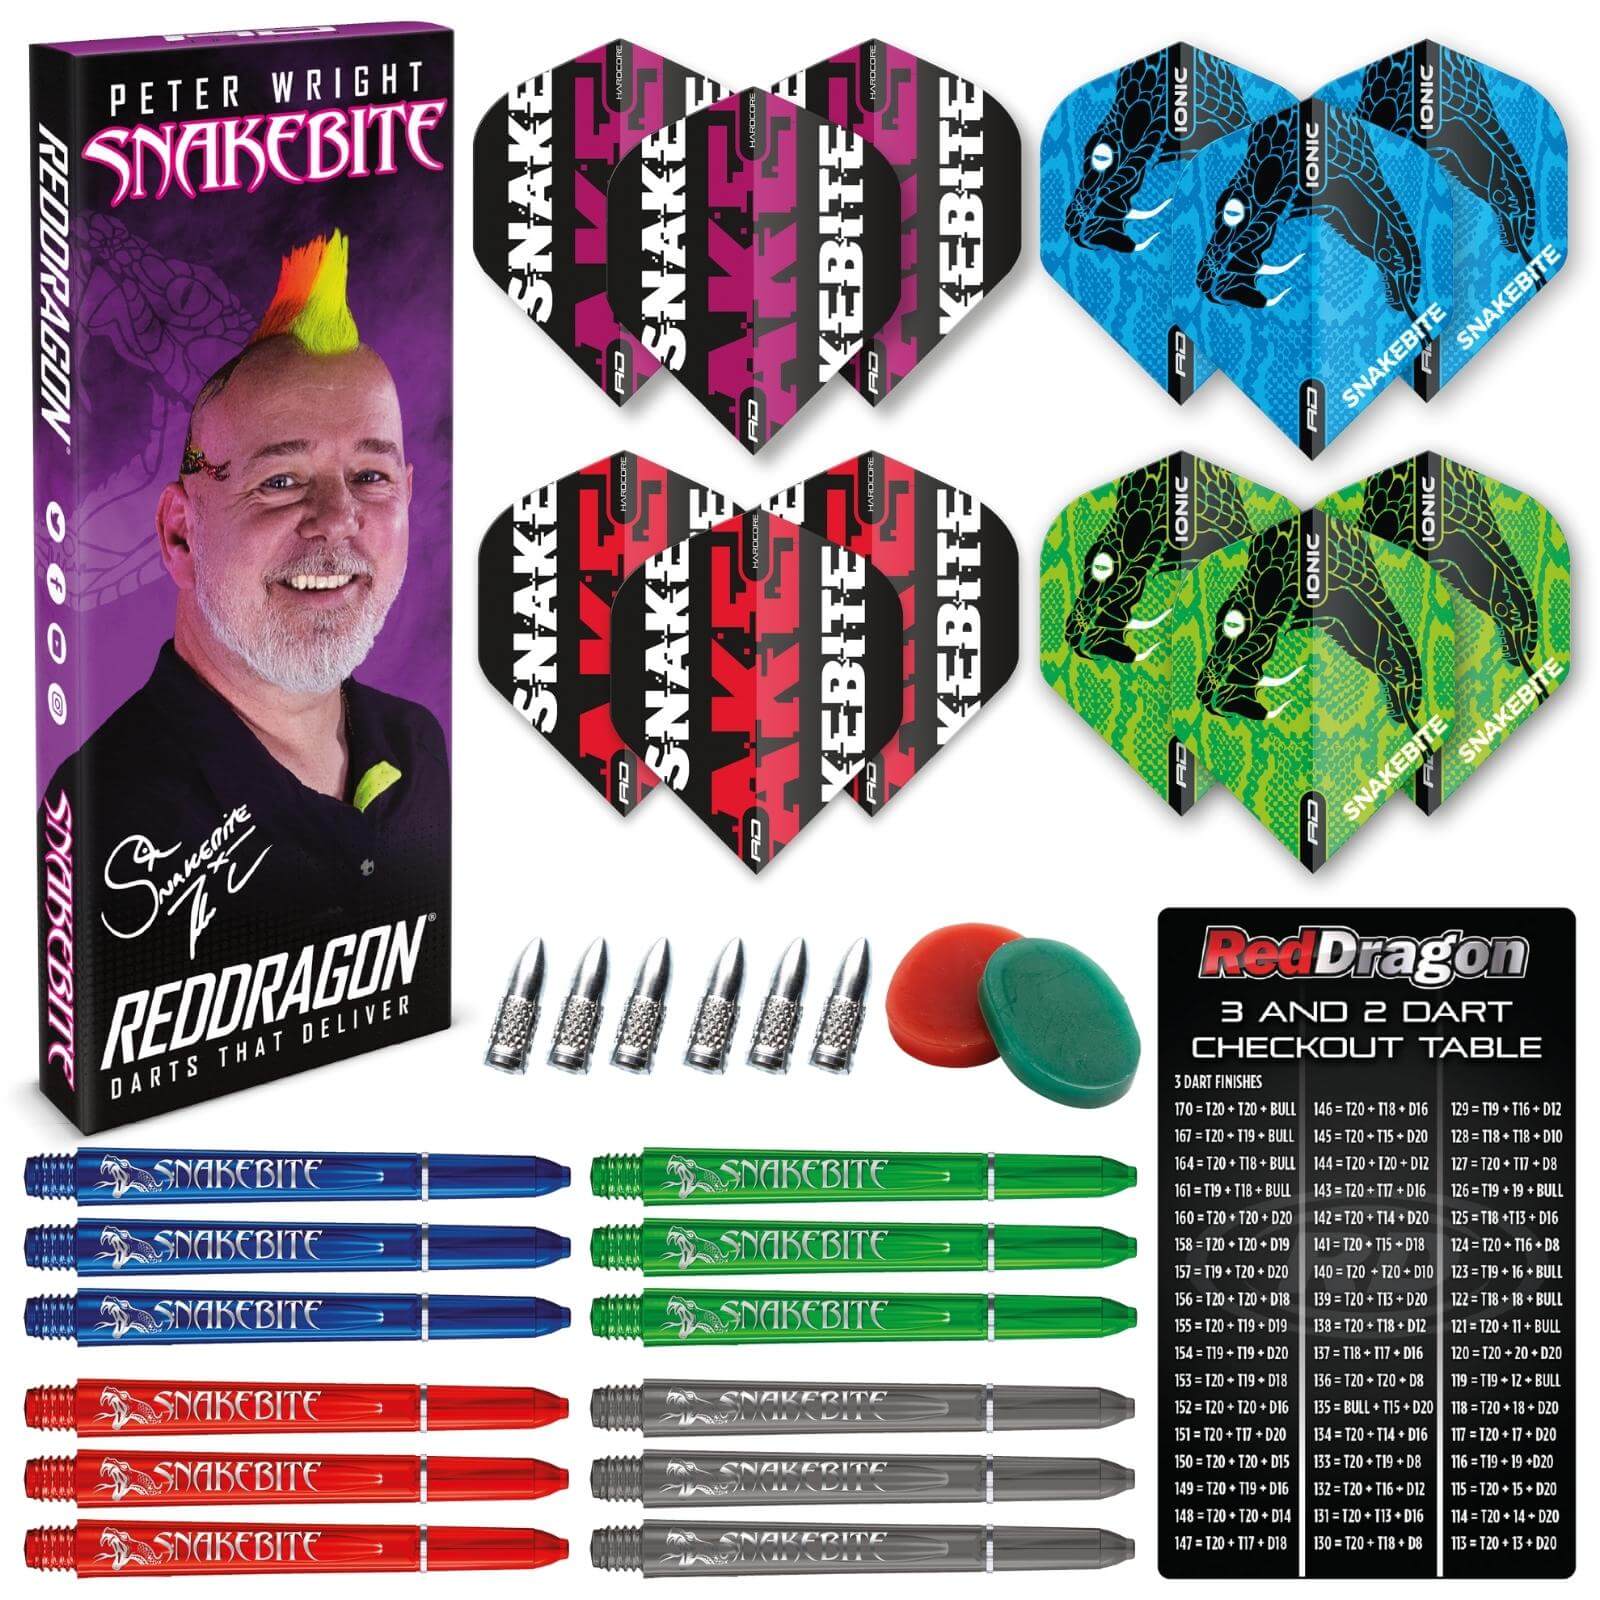 Training Accessories - Red Dragon - Peter Snakebite Wright - Darts Accessory Pack 